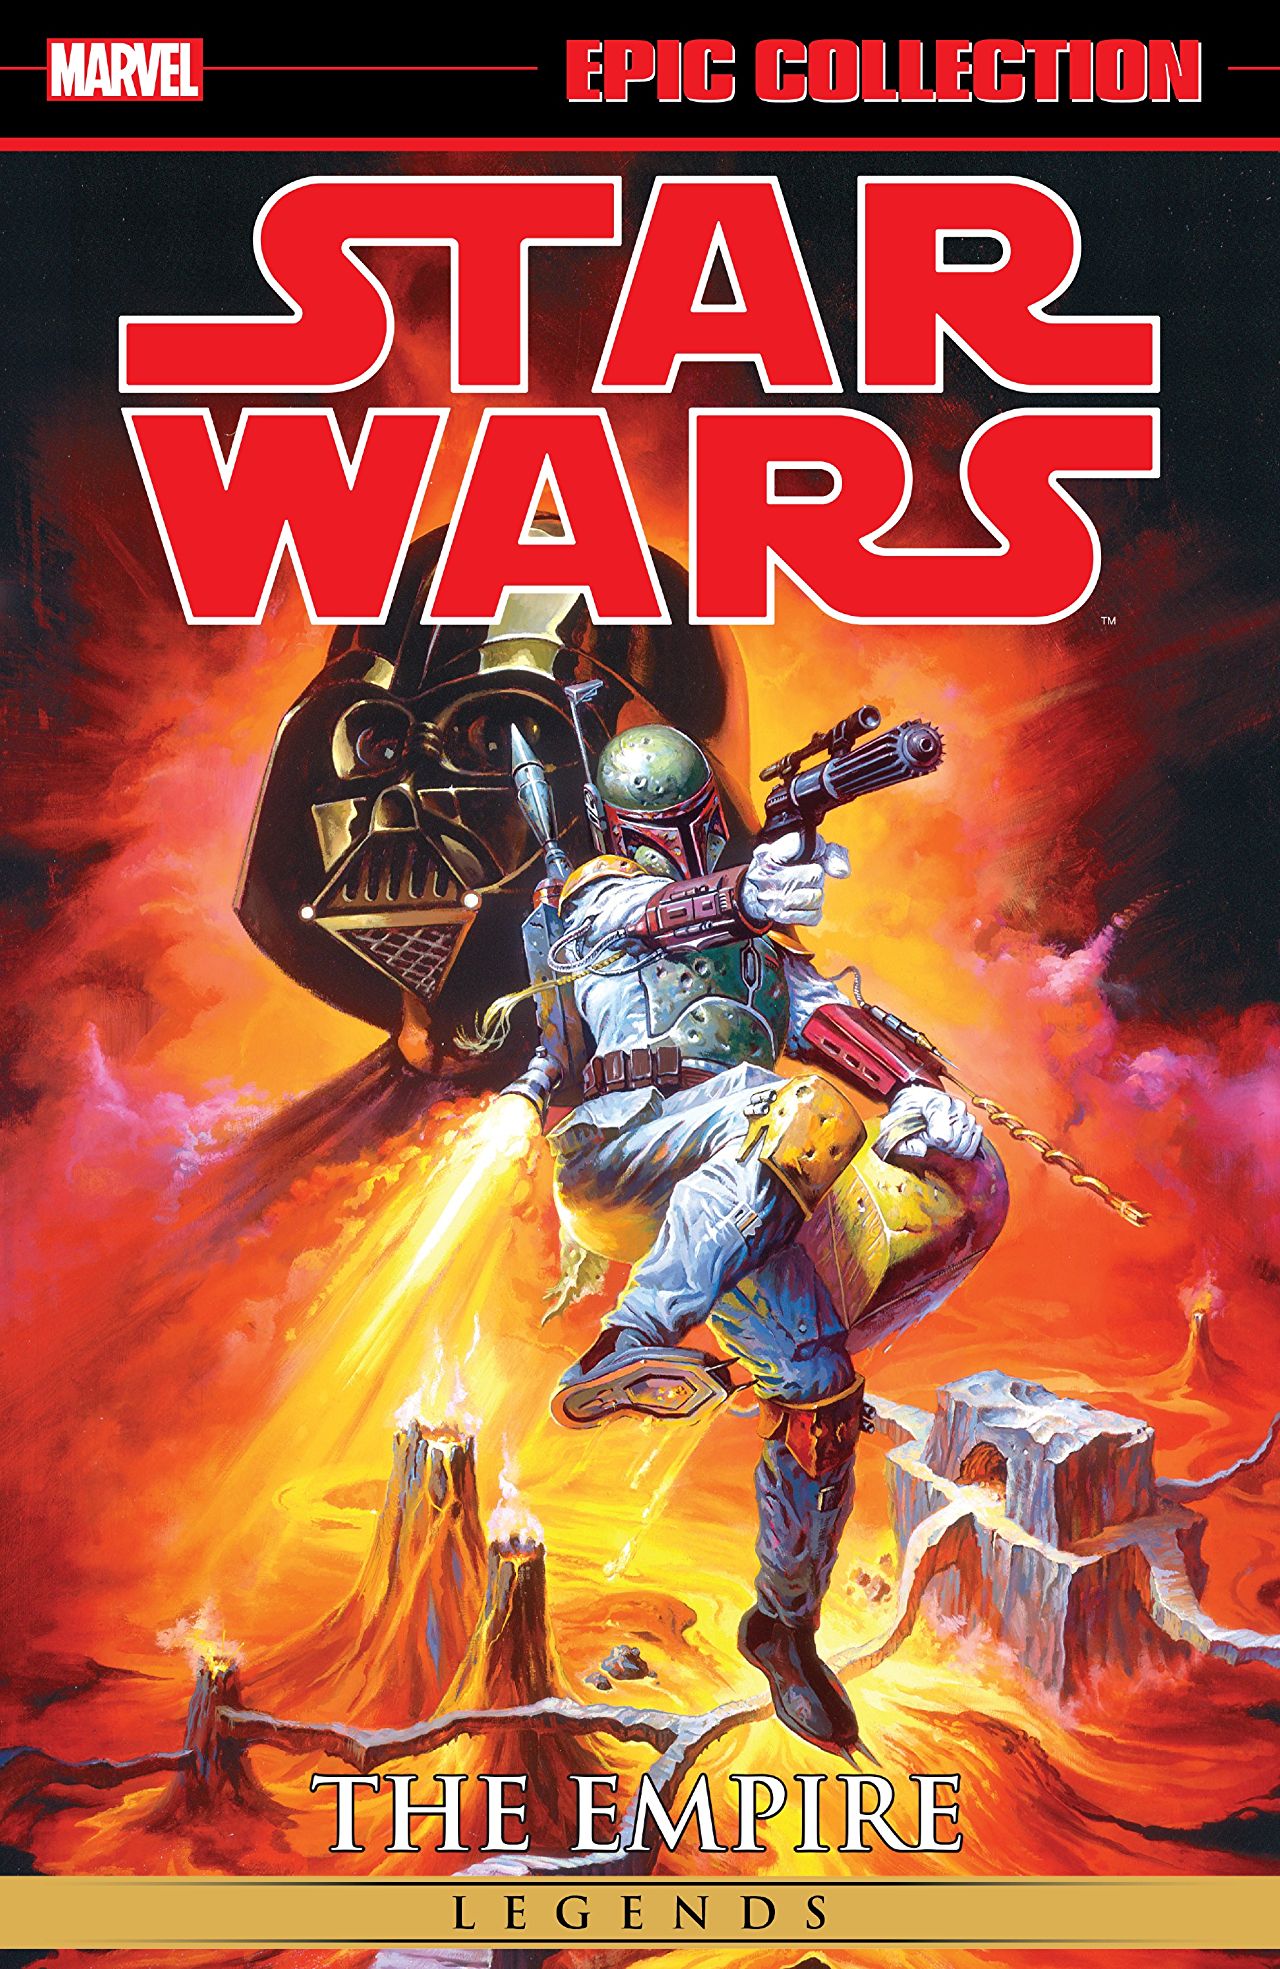 'Star Wars Legends Epic Collection: The Empire Vol. 4' review: A definitive representation of different styles and storylines in the Star Wars universe